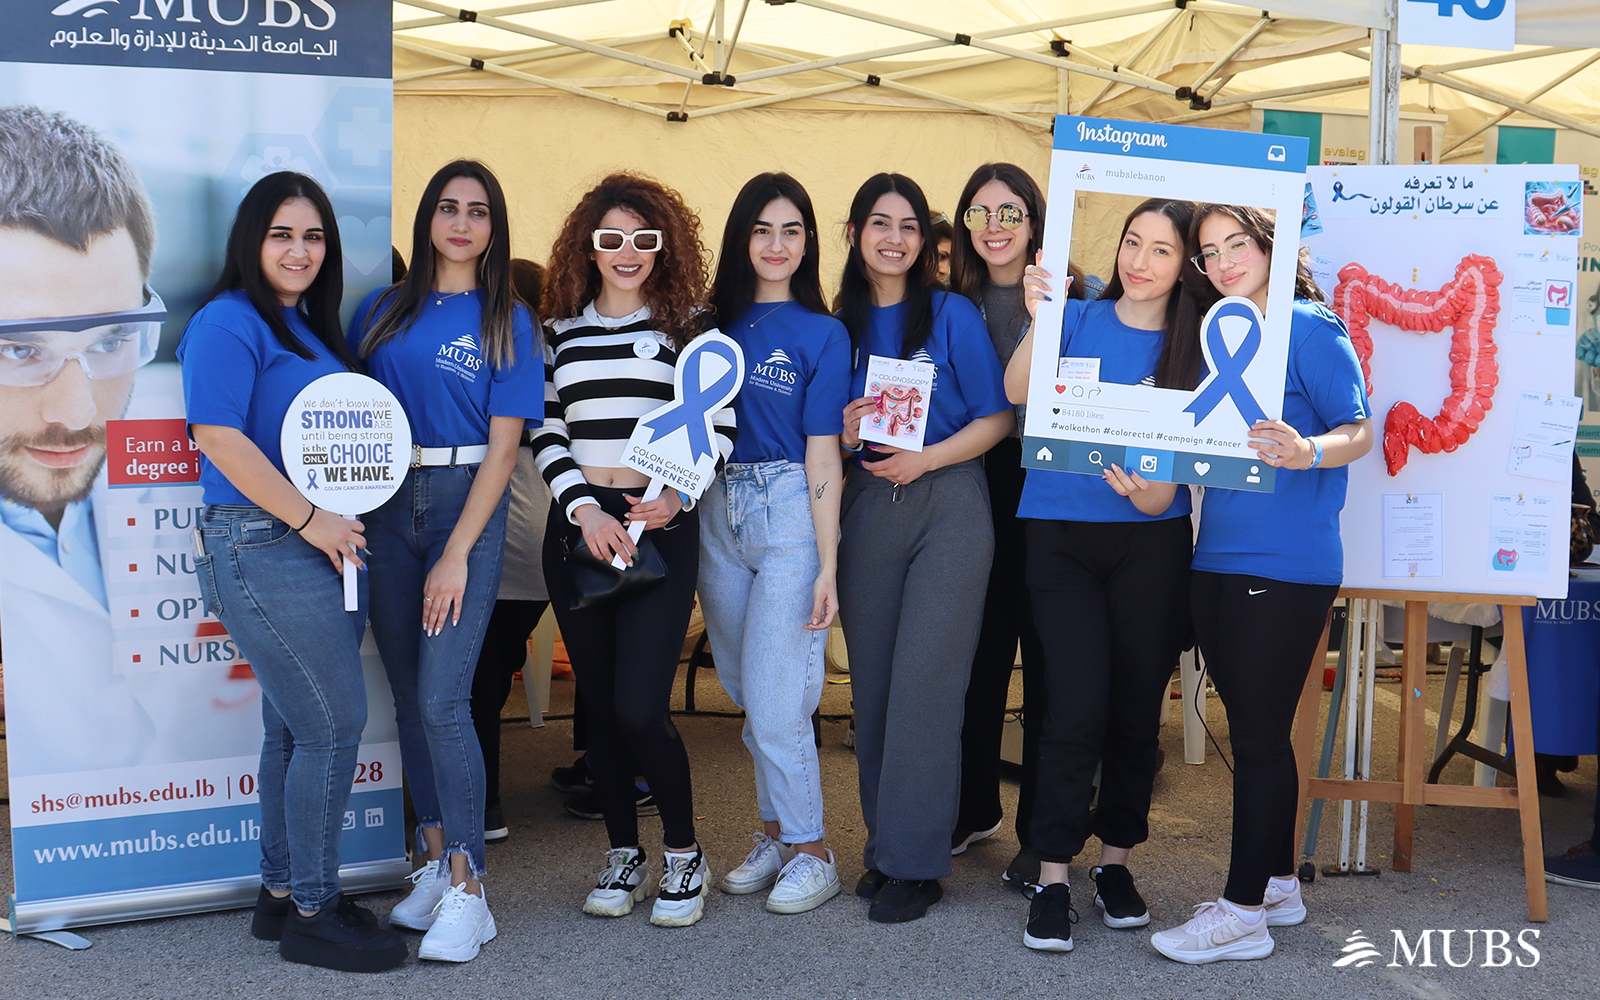 MUBS Ranked Third in the Annual Colorectal Cancer Awareness Competition